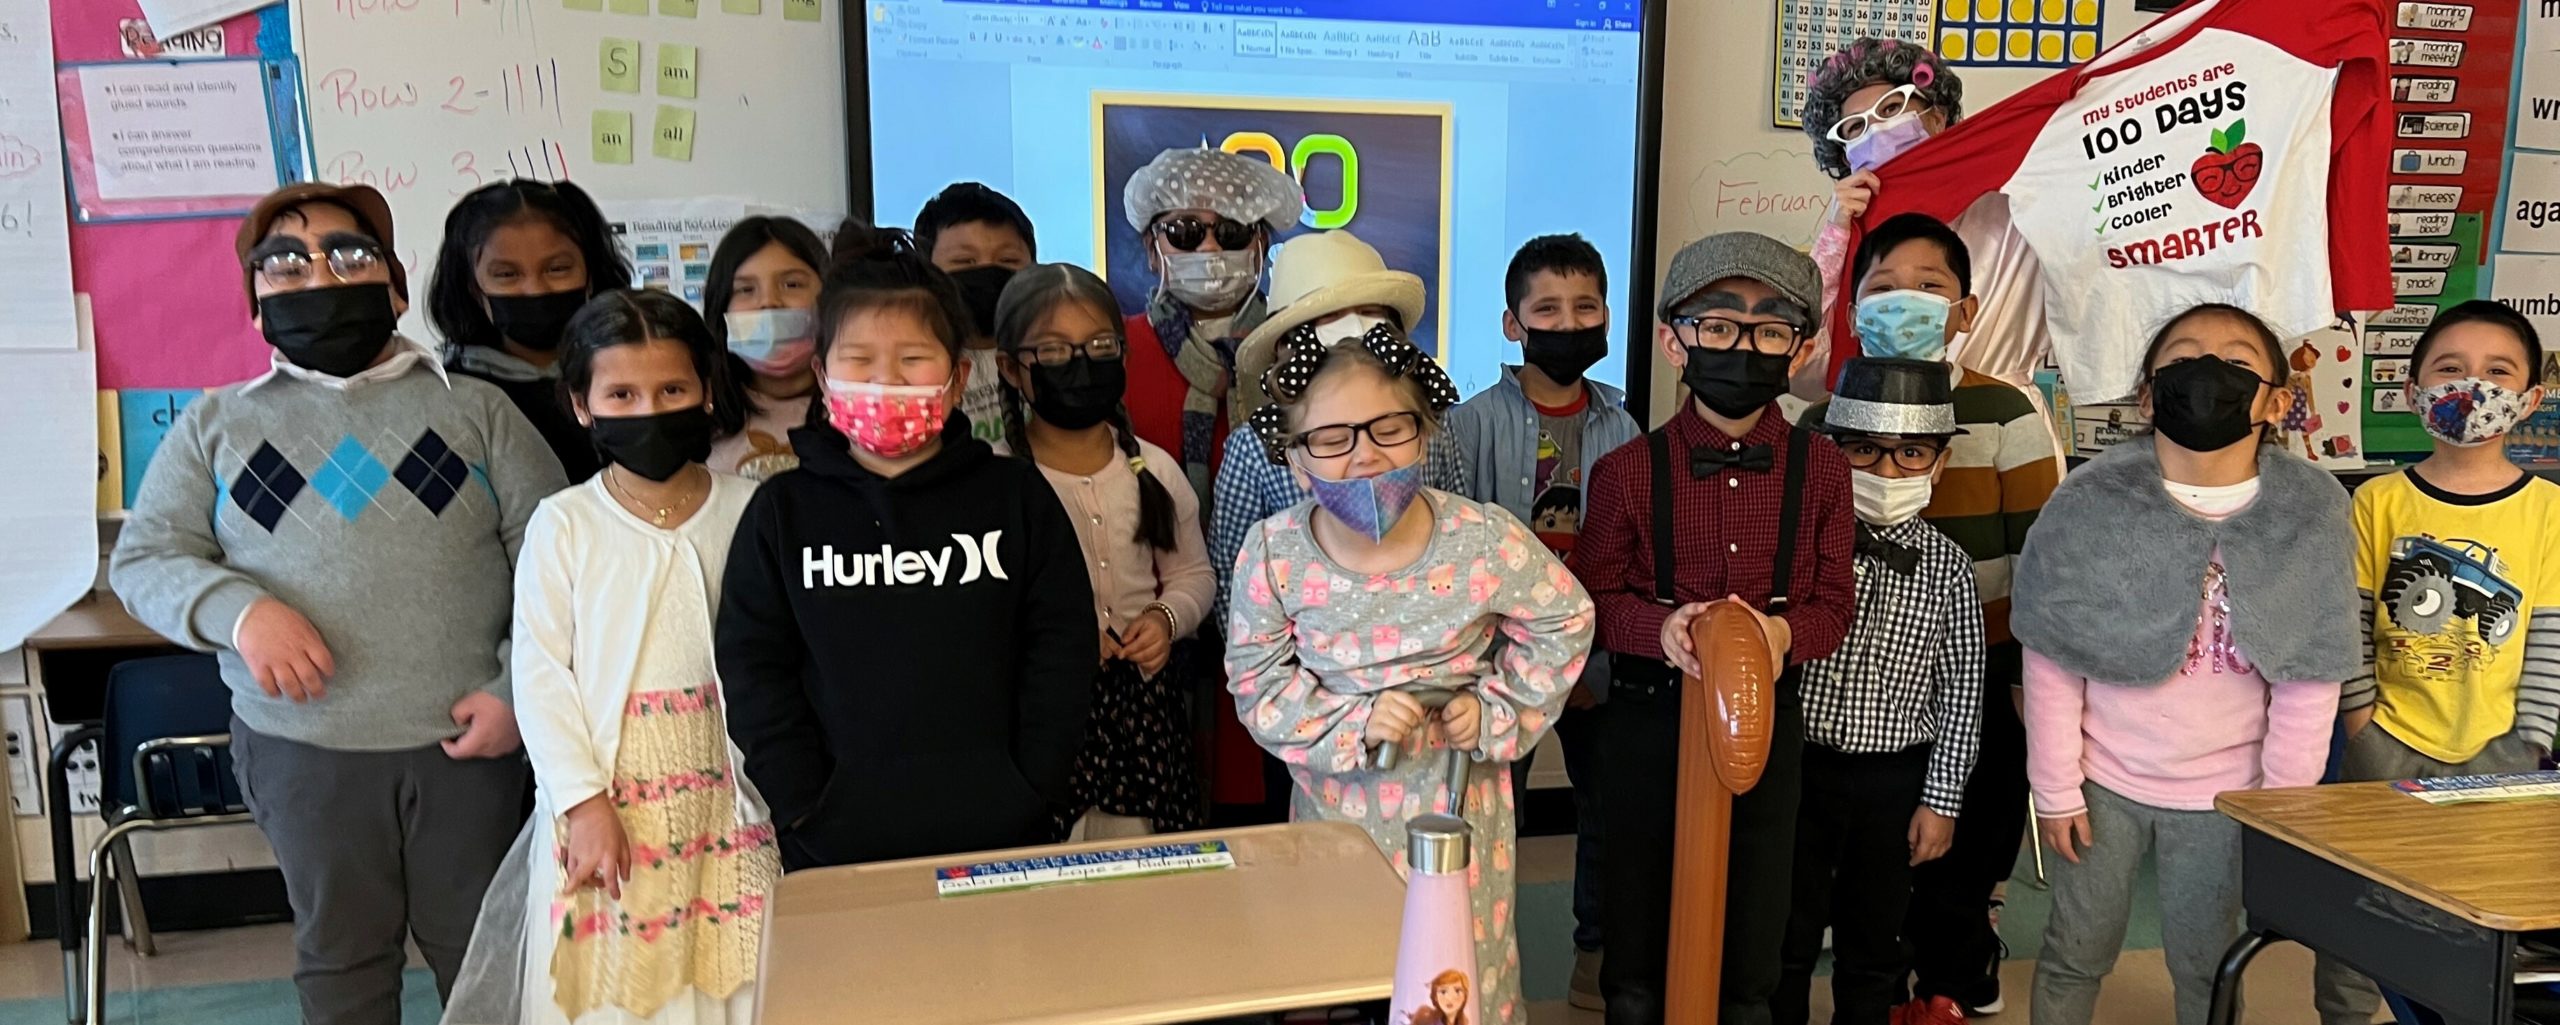 Students at Hampton Bays Elementary School celebrated the completion of the first 100 days of school on February 16 with a variety of activities. In Michelle Racywolski’s class, first graders dressed up like 100-year-olds and had fun participating in counting lessons.